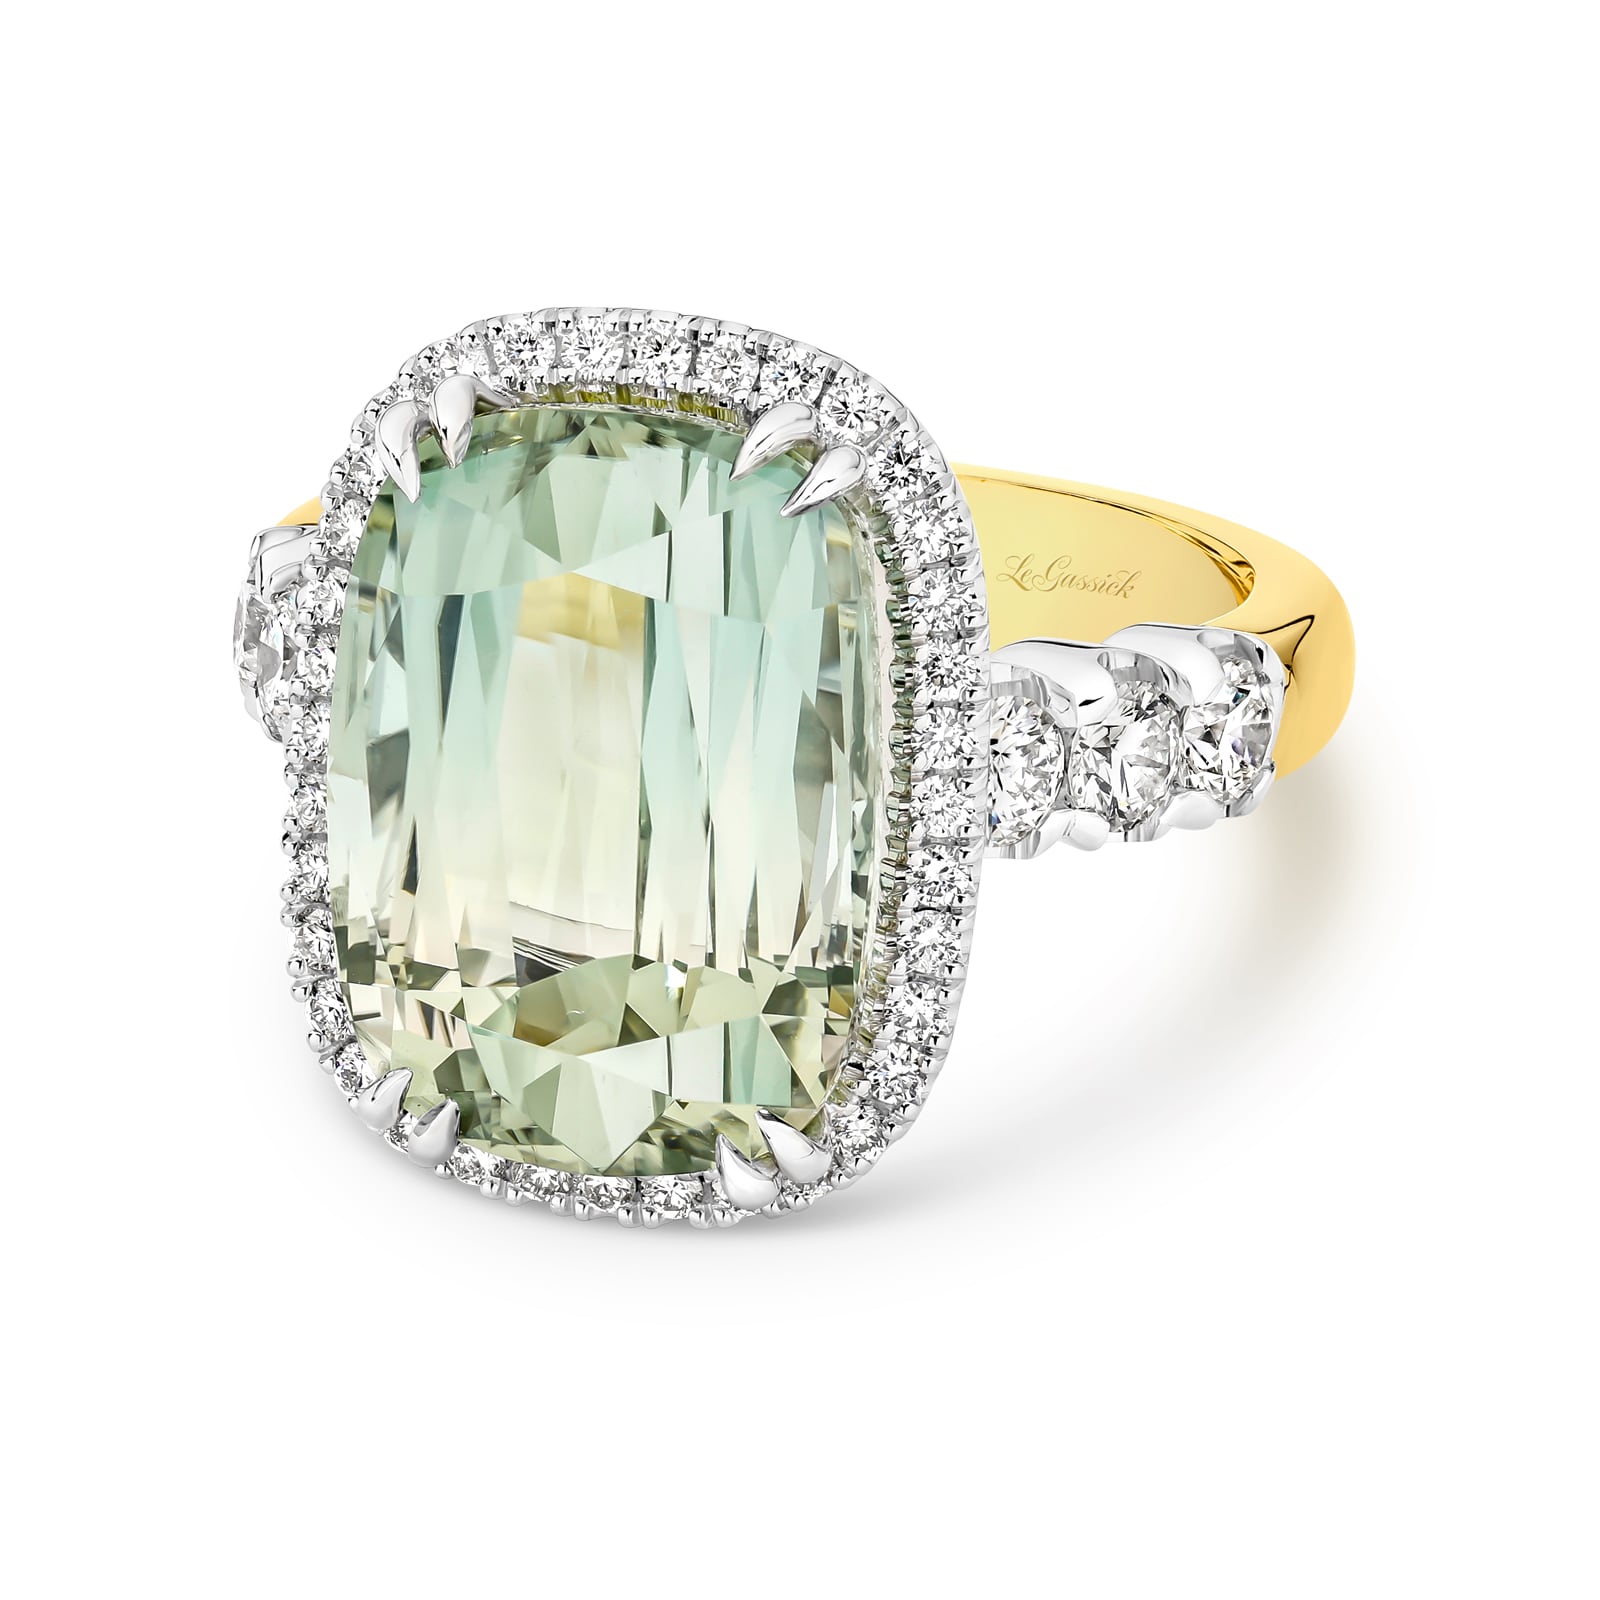 Asherah, a breathtaking 11.33ct natural green tourmaline and diamond ring. Part of the Beyond Luxury Collection by LeGassick.